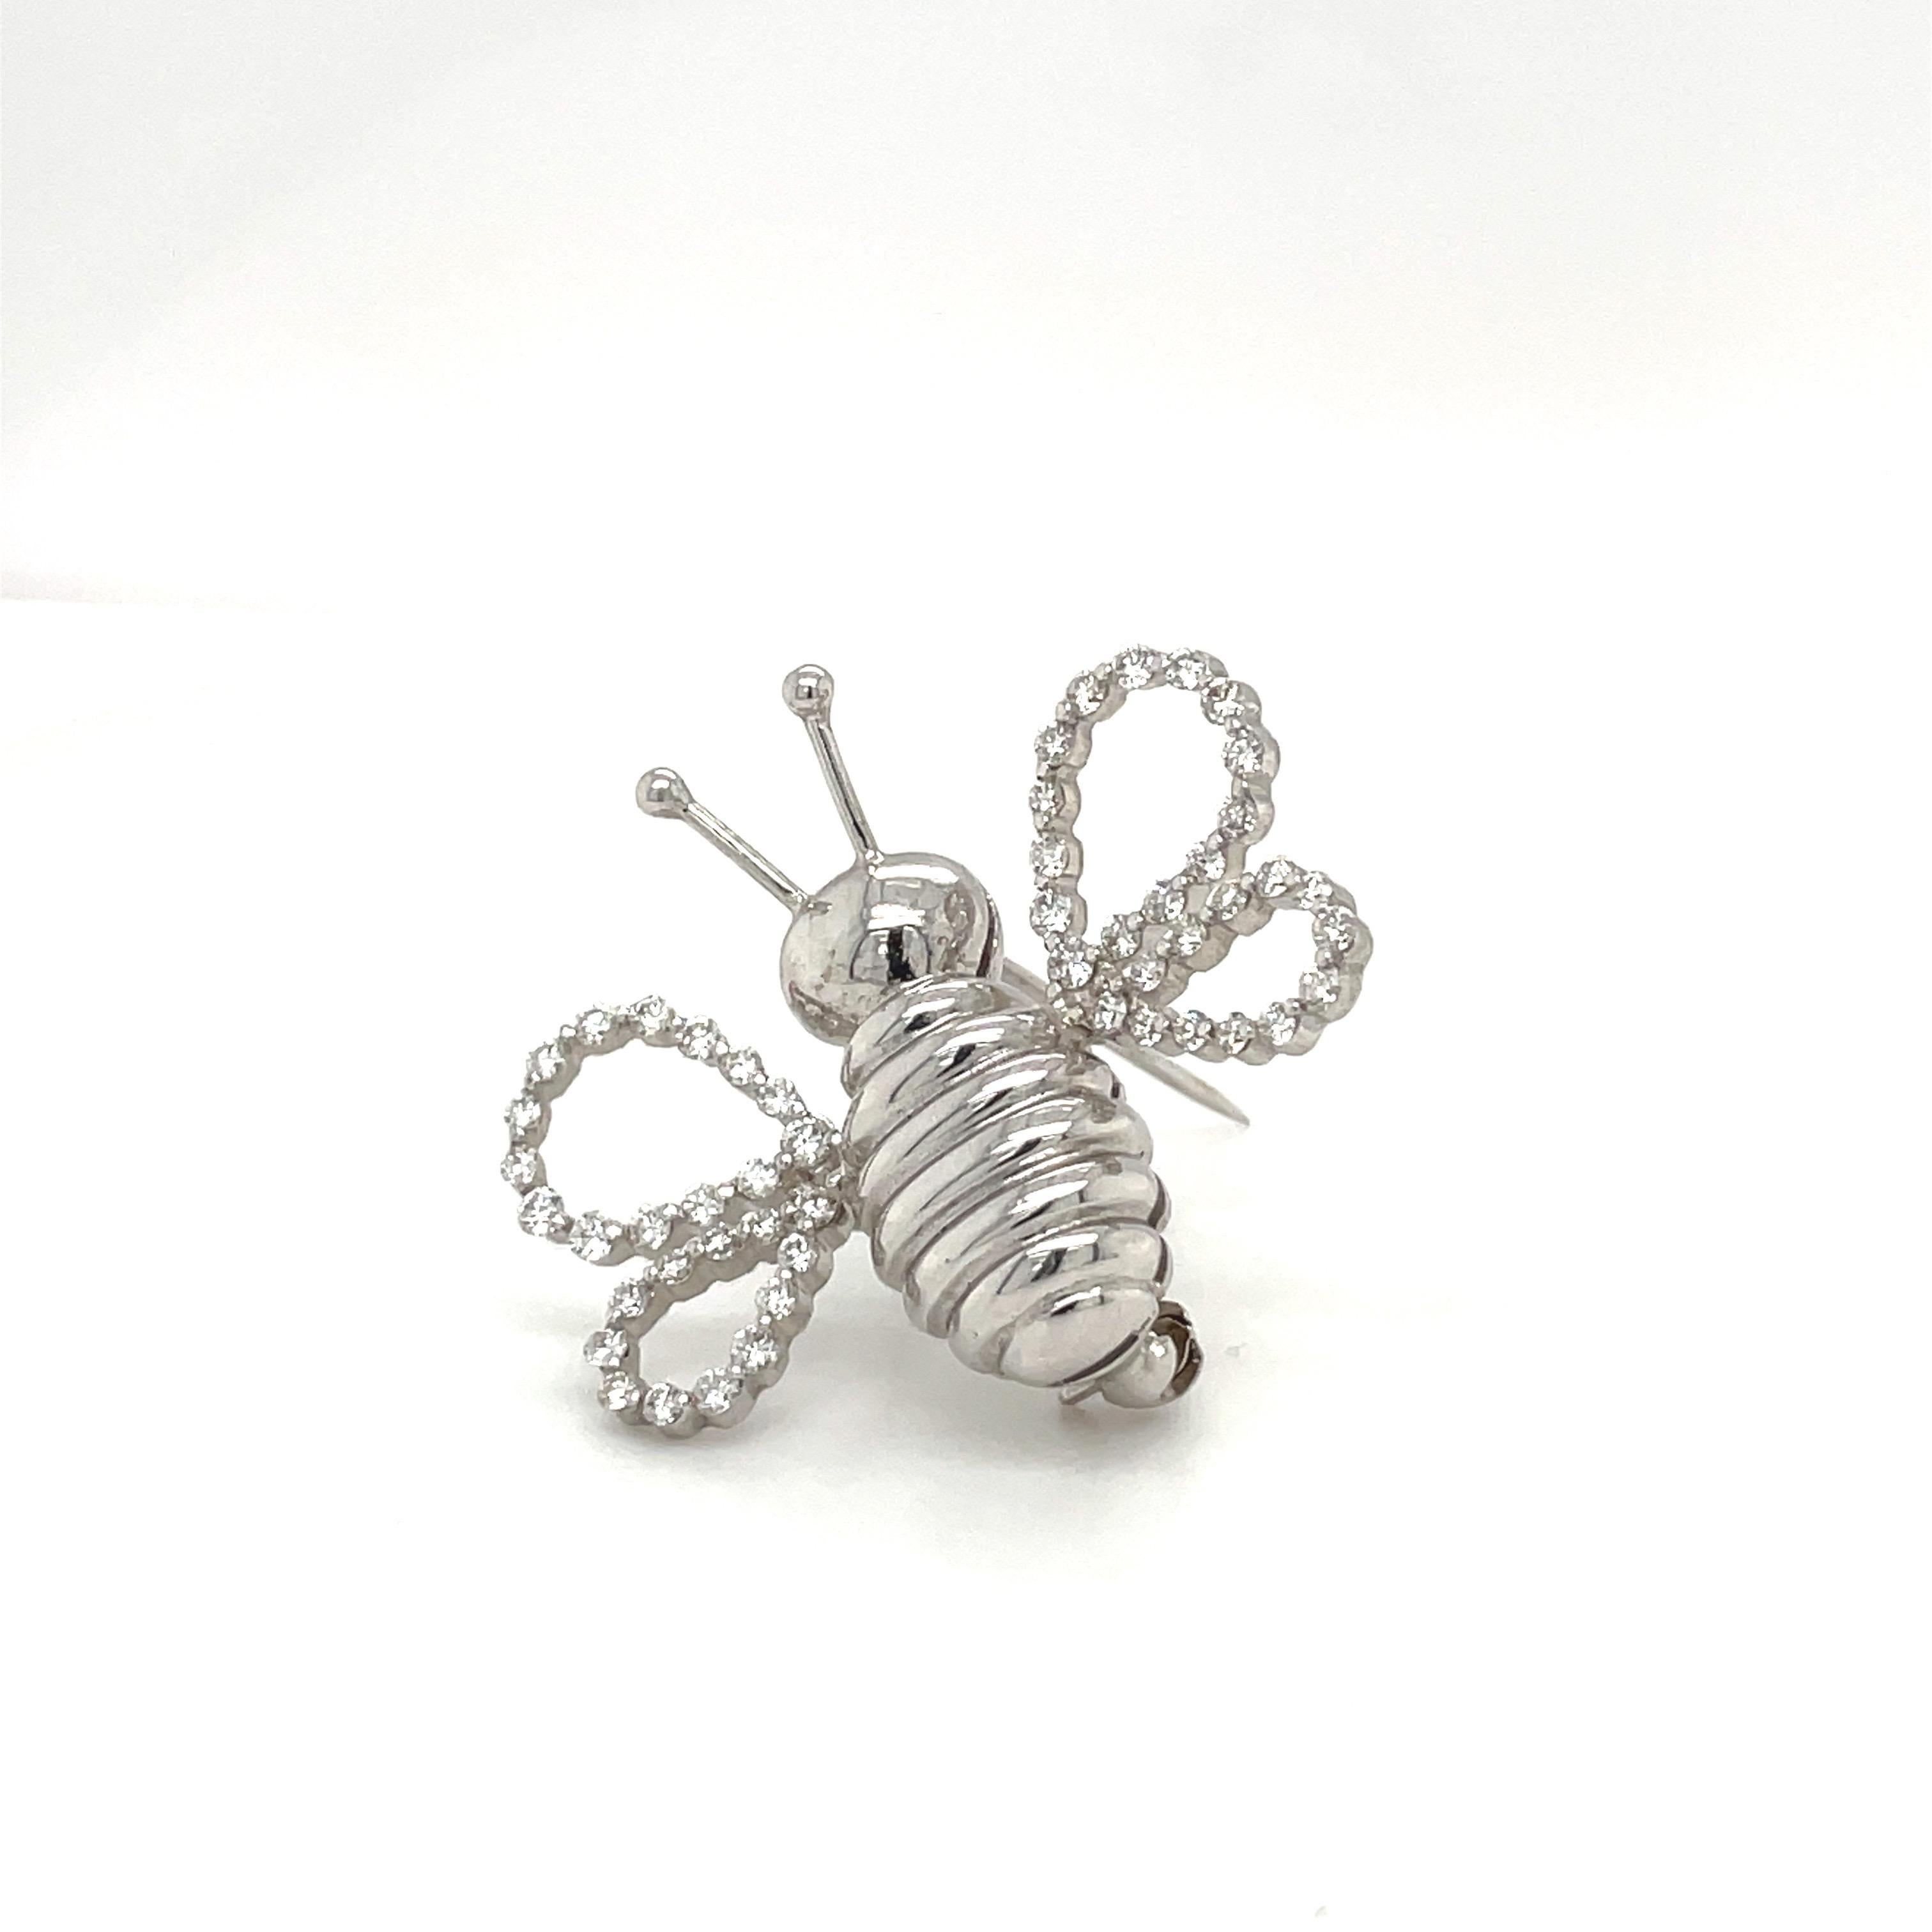 A lovely designed 18 karat white gold bee brooch. The bee is crafted in a high polished white gold. The wings are set with round brilliant diamonds. The setting is a 2 prong setting ,giving a seamless look. The bee measures 1-3/16